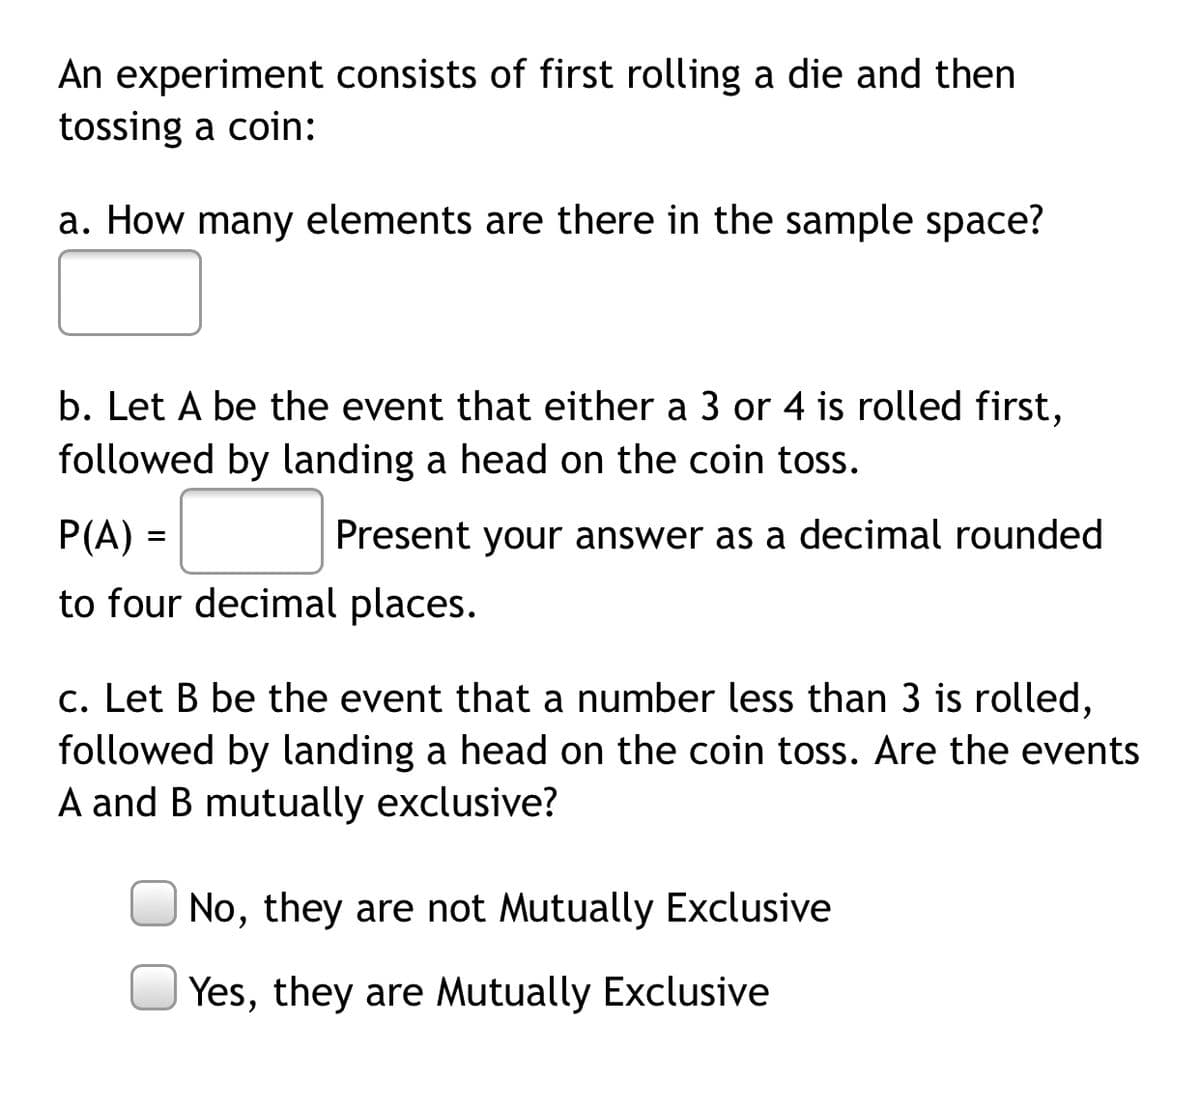 An experiment consists of first rolling a die and then
tossing a coin:
a. How many elements are there in the sample space?
b. Let A be the event that either a 3 or 4 is rolled first,
followed by landing a head on the coin toss.
P(A) =
Present your answer as a decimal rounded
to four decimal places.
c. Let B be the event that a number less than 3 is rolled,
followed by landing a head on the coin toss. Are the events
A and B mutually exclusive?
No, they are not Mutually Exclusive
Yes, they are Mutually Exclusive
